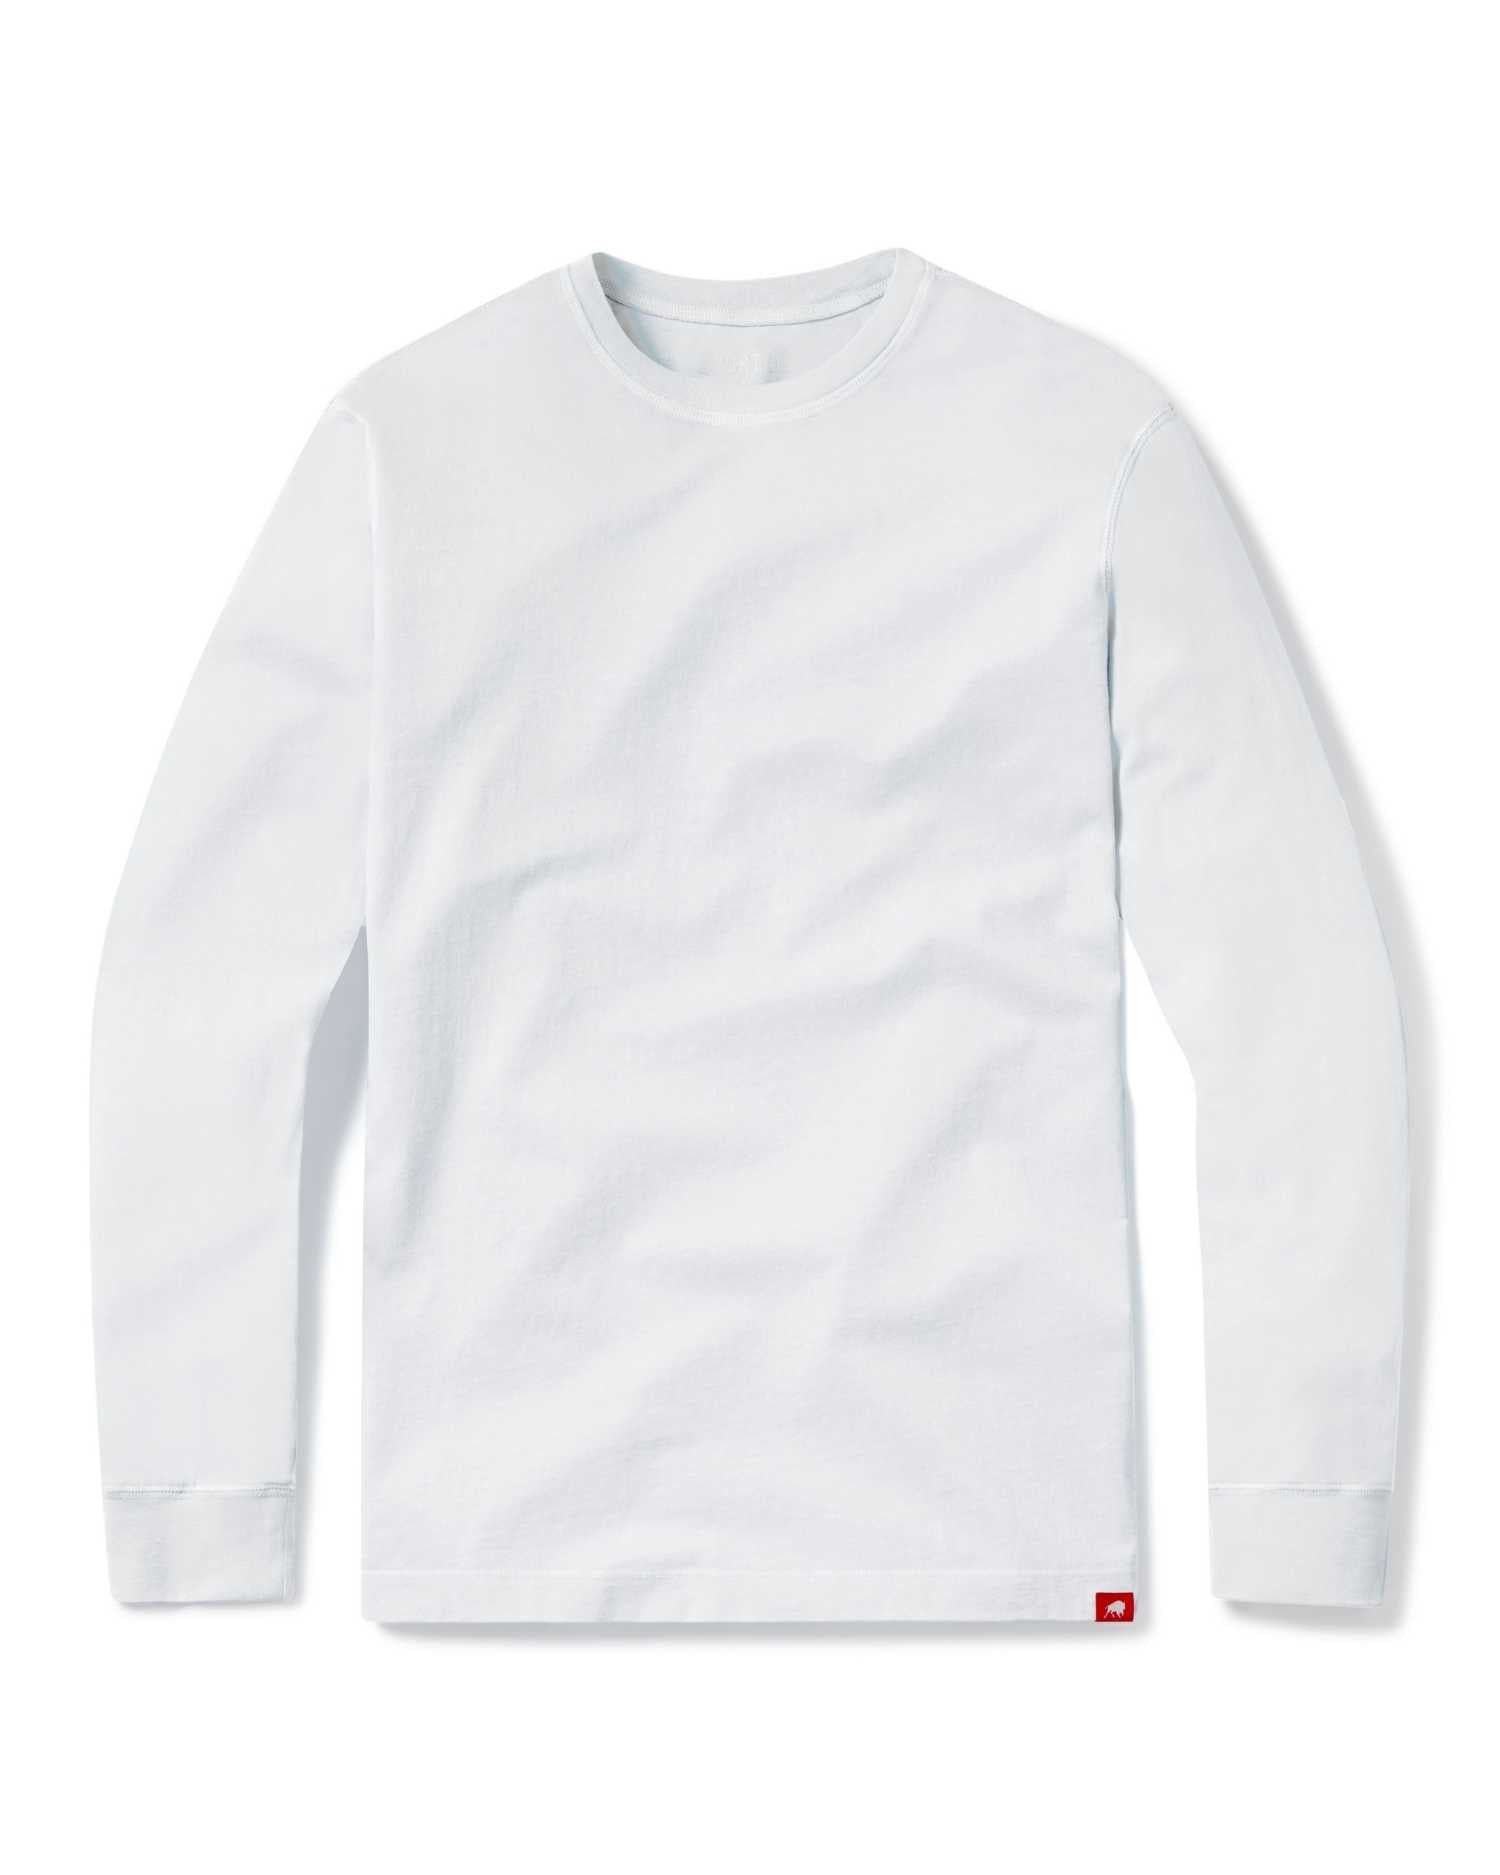 Mohave Long Sleeve Tee - Sportiqe Apparel